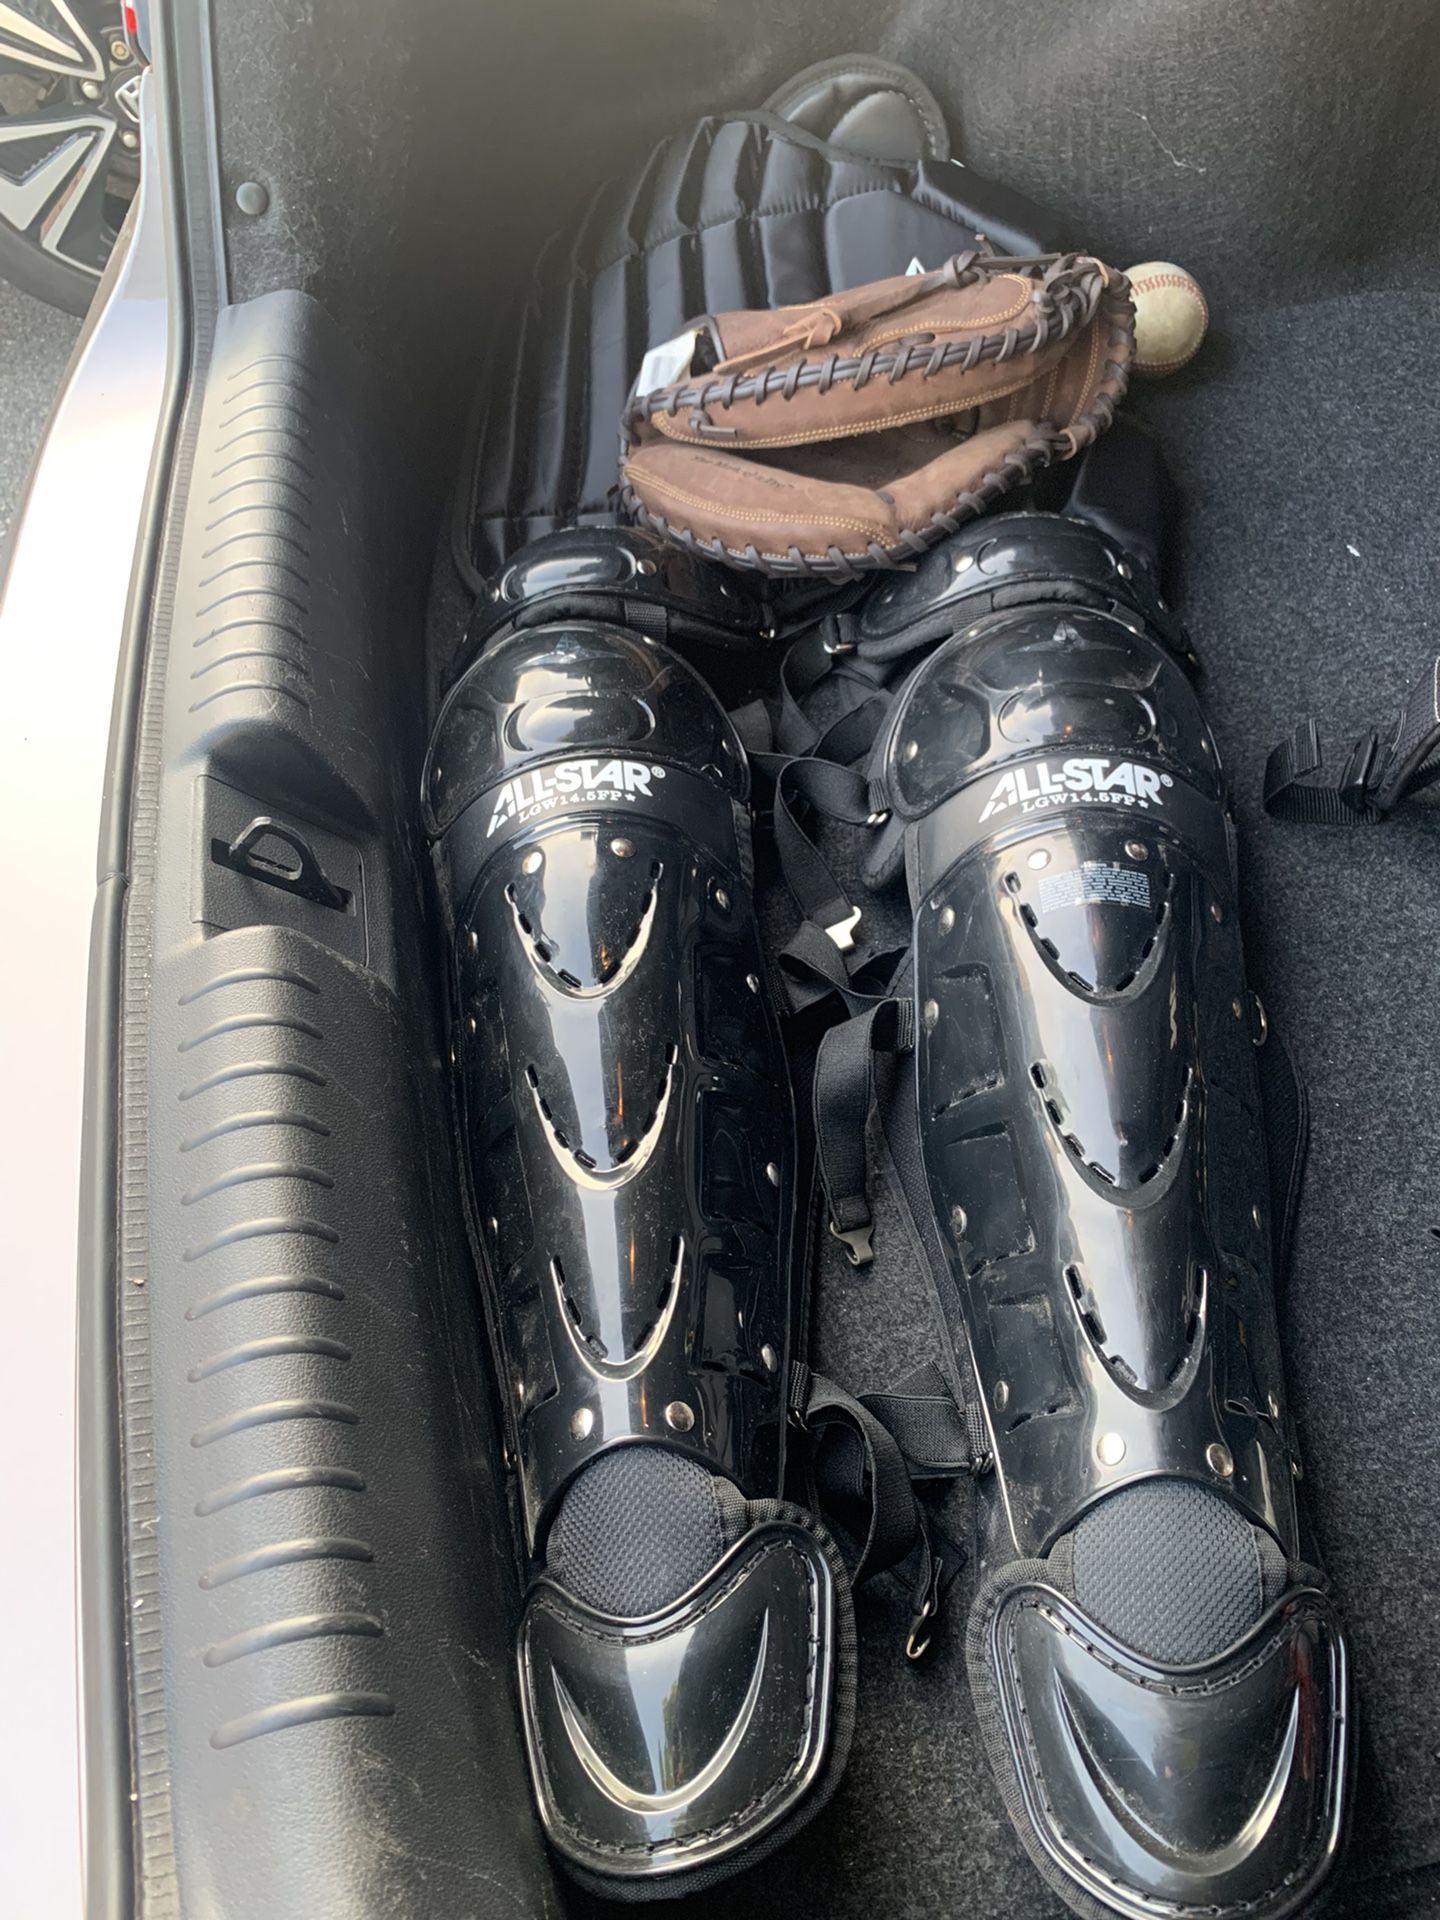 Catchers gear and Glove